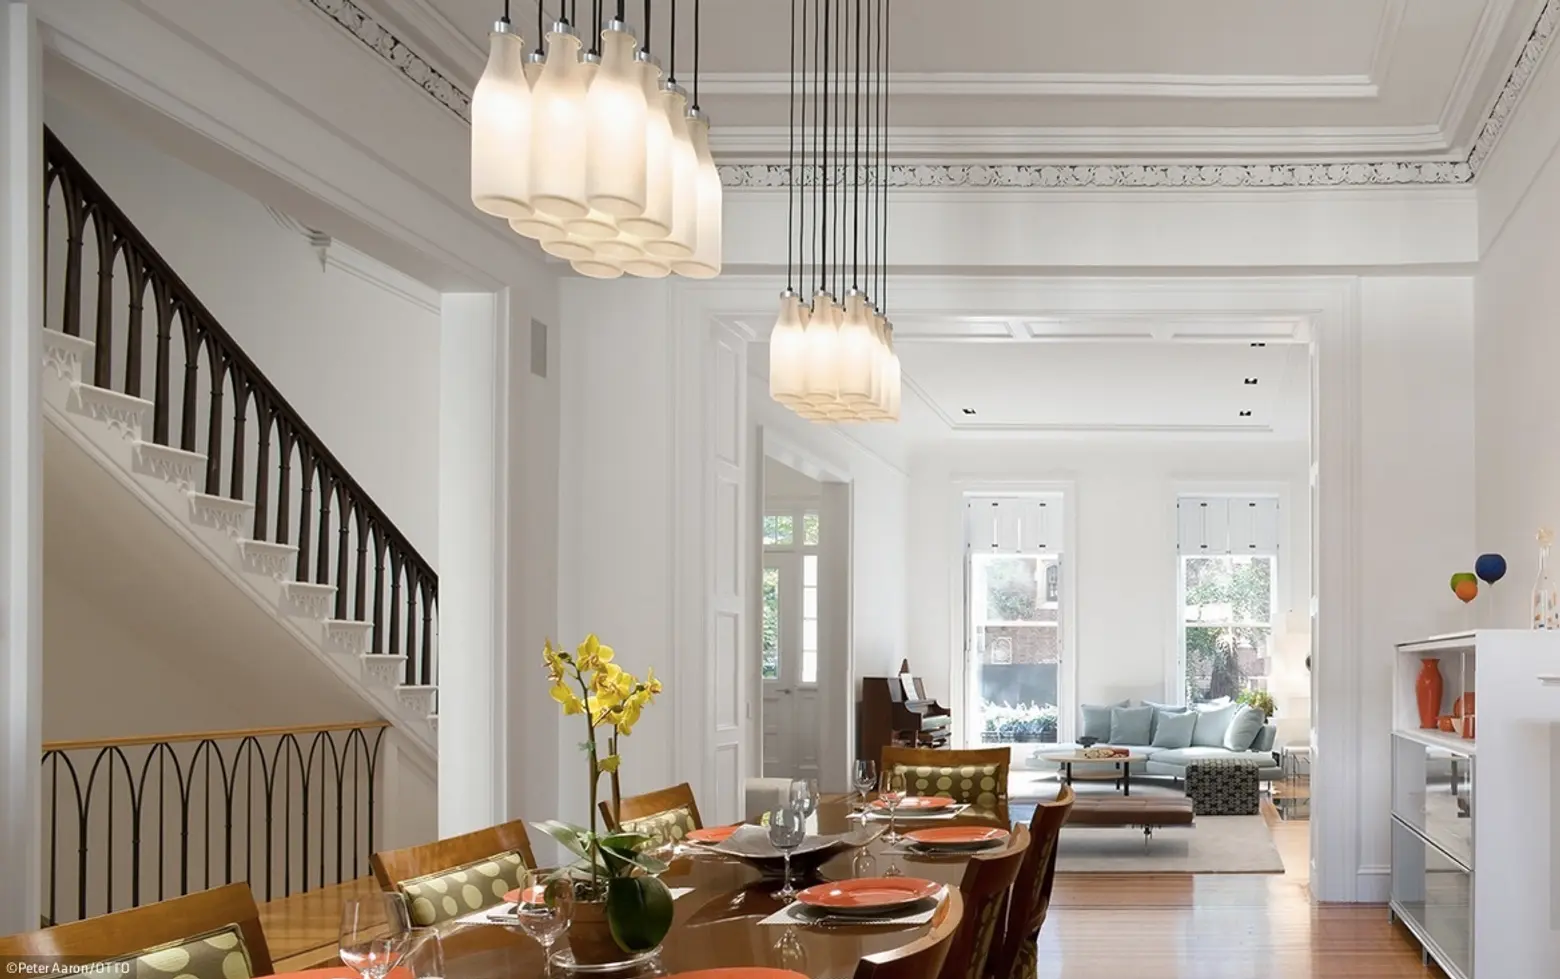 Brooklyn Heights Gothic Revival, dining room, original steel table